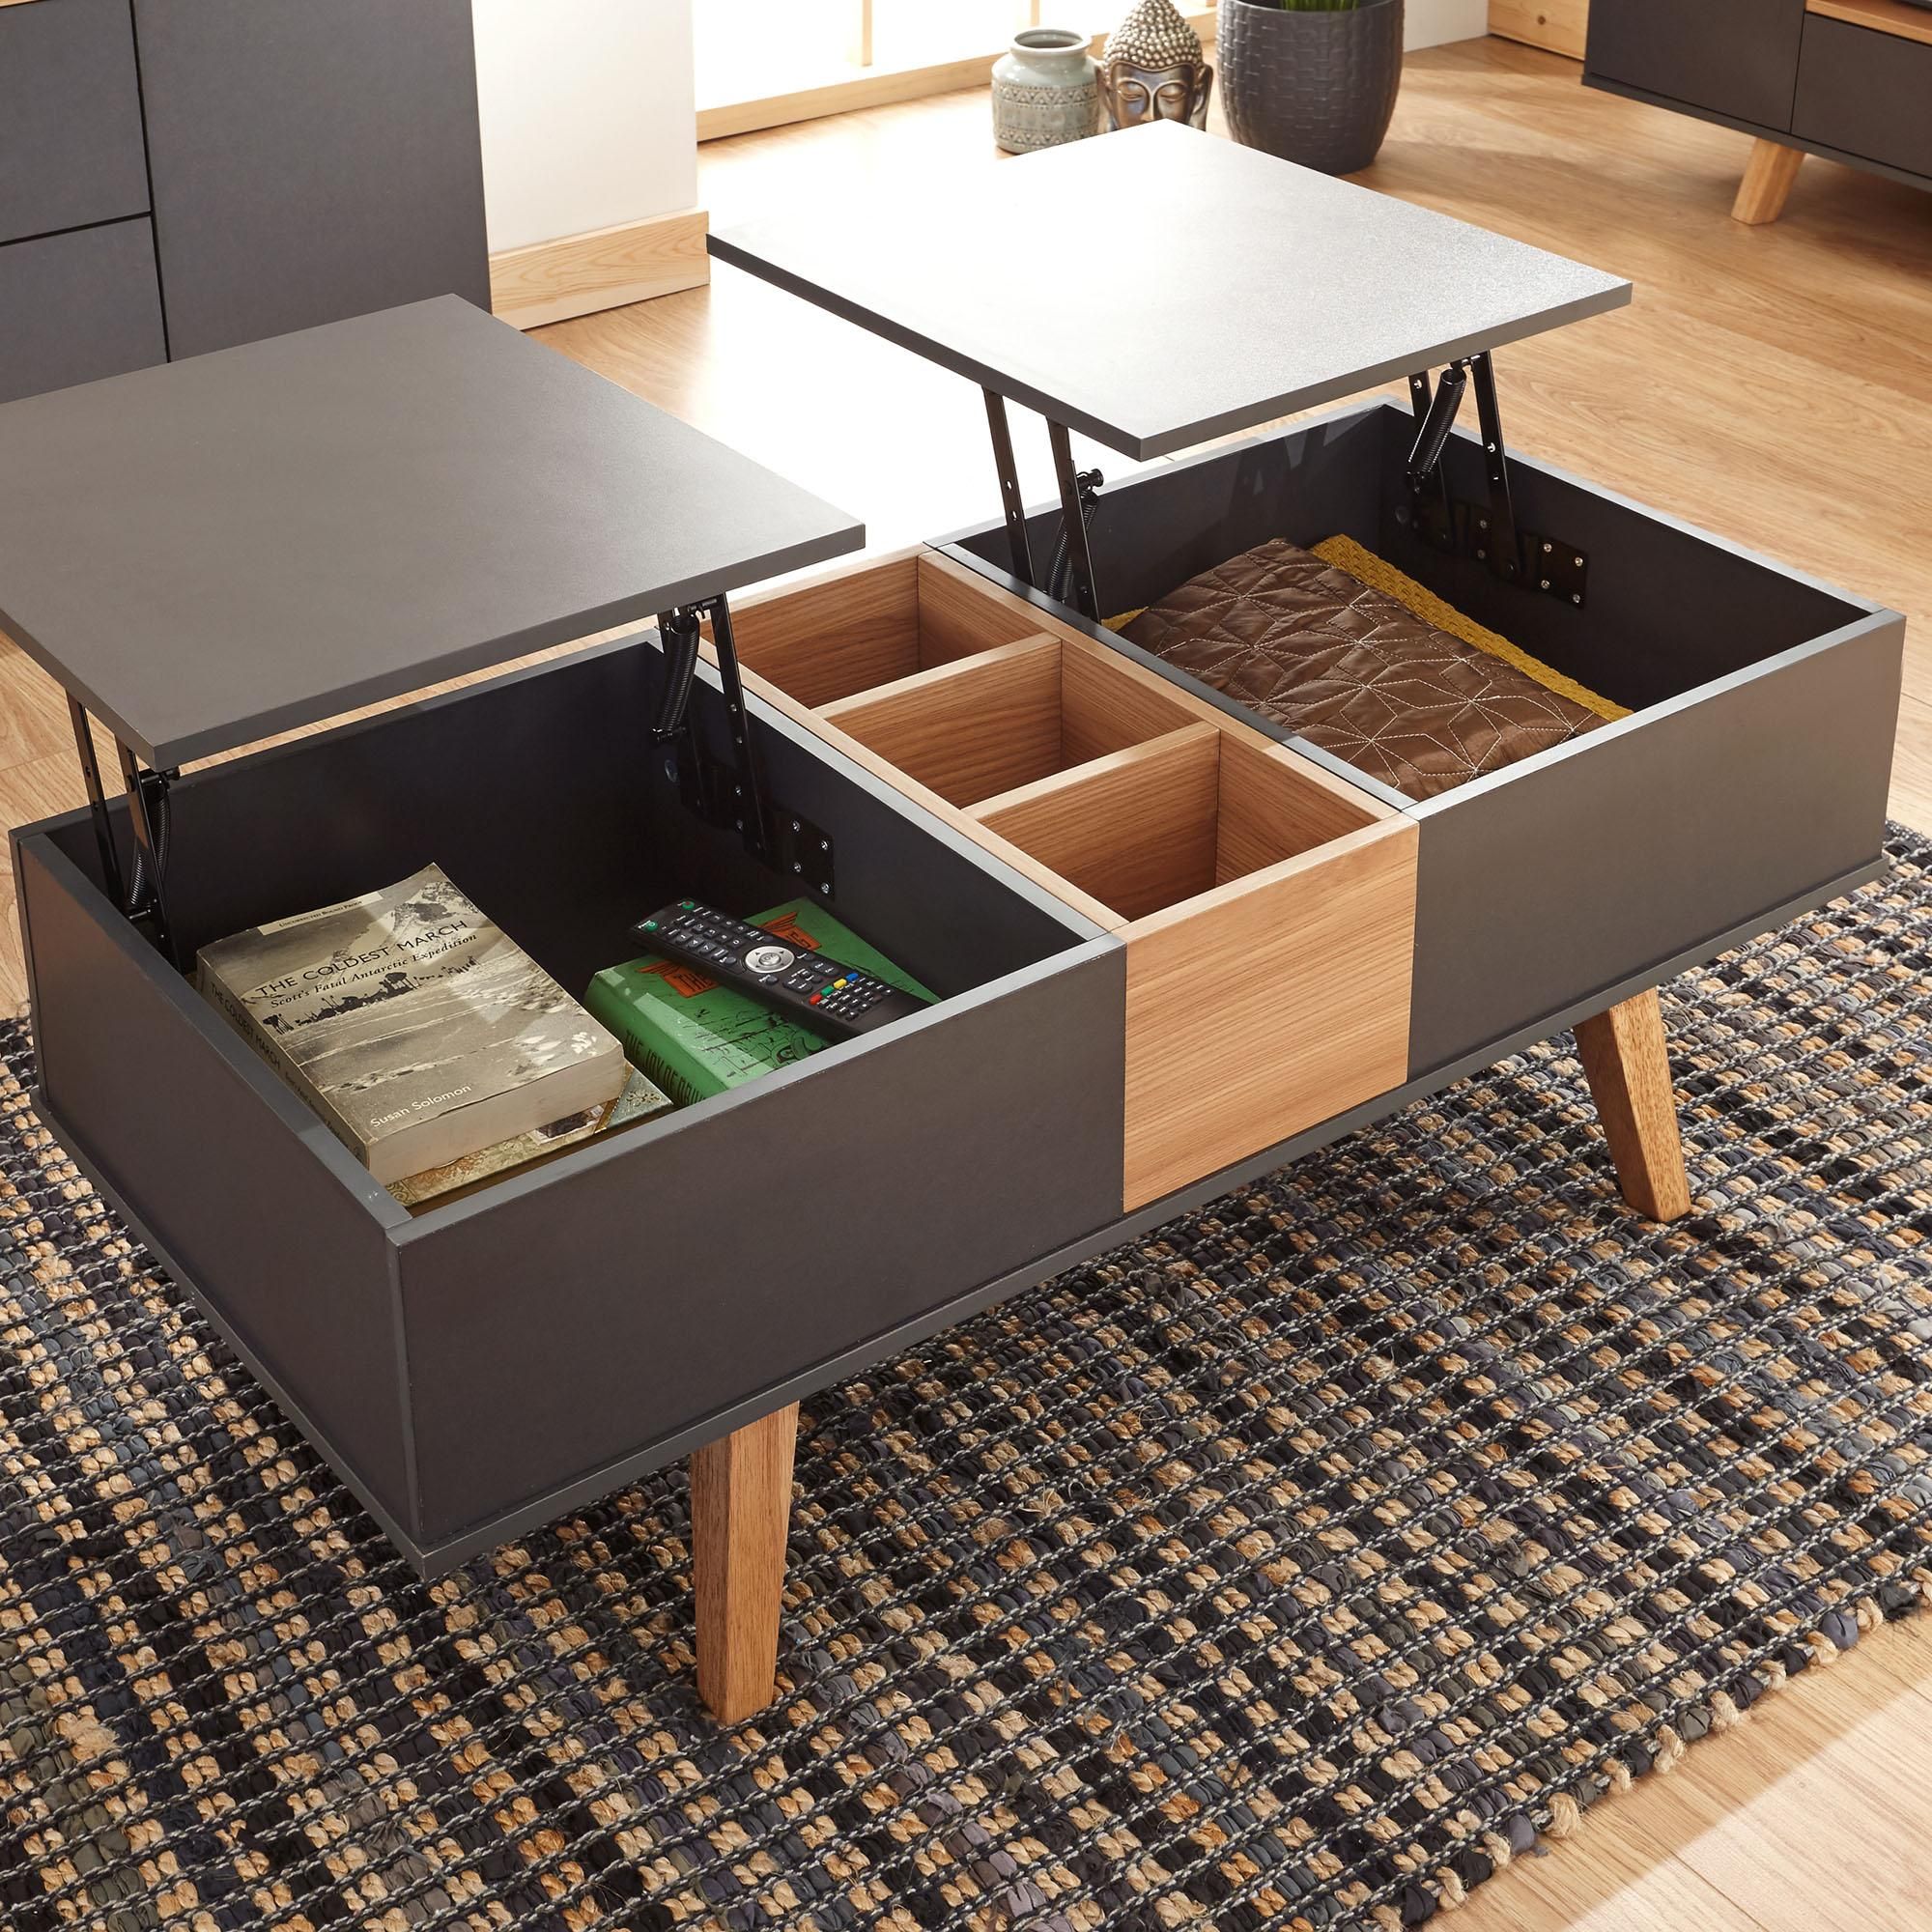 Lift Top Coffee Table – A more Practical
Option